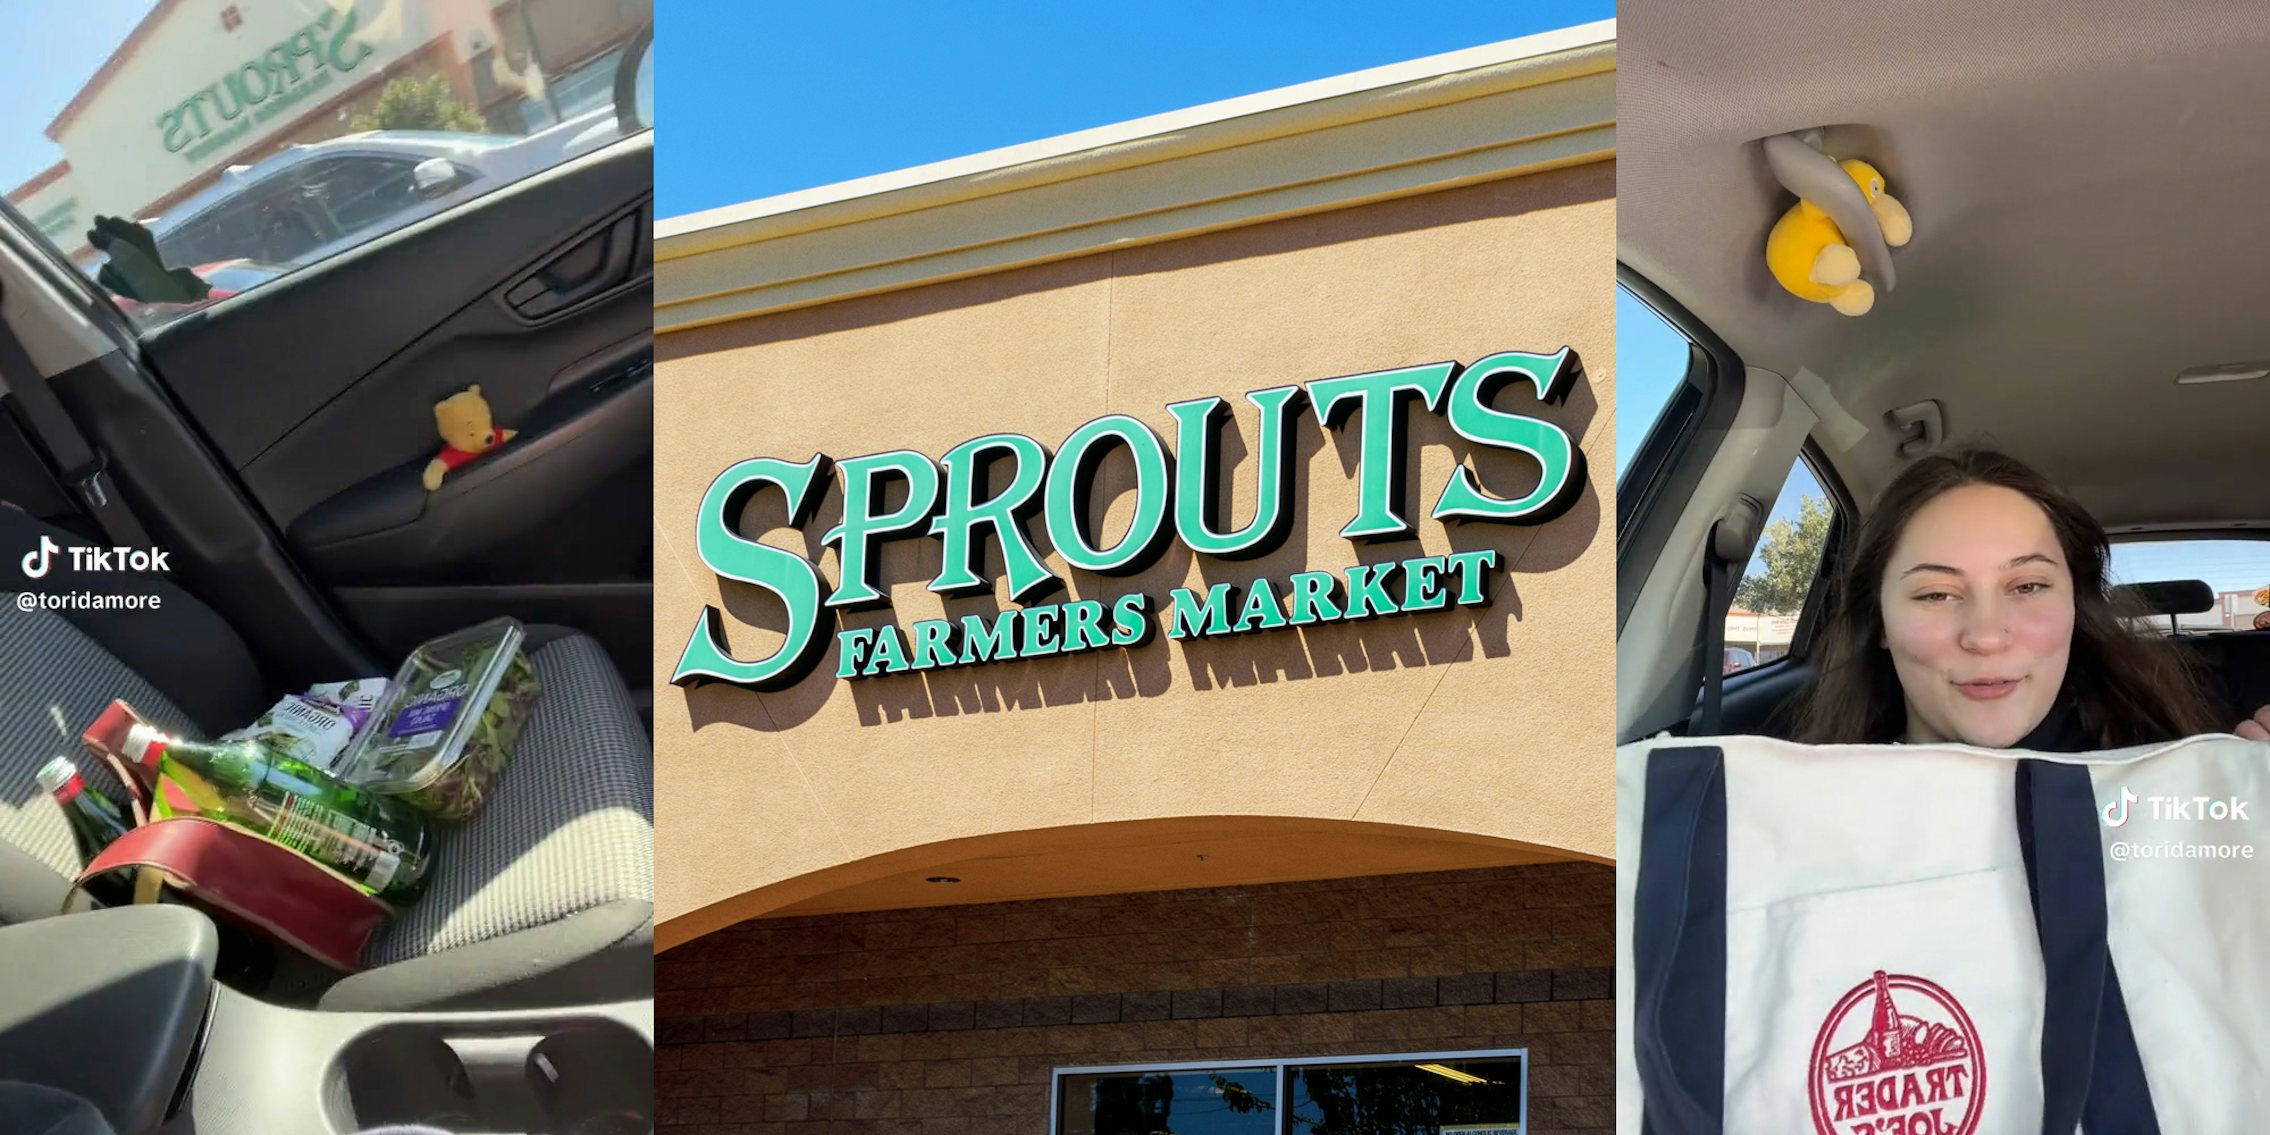 groceries on car seat (l) Sprouts Farmers Market sign (c) young woman in car with Trader Joe's reusable bag (r)